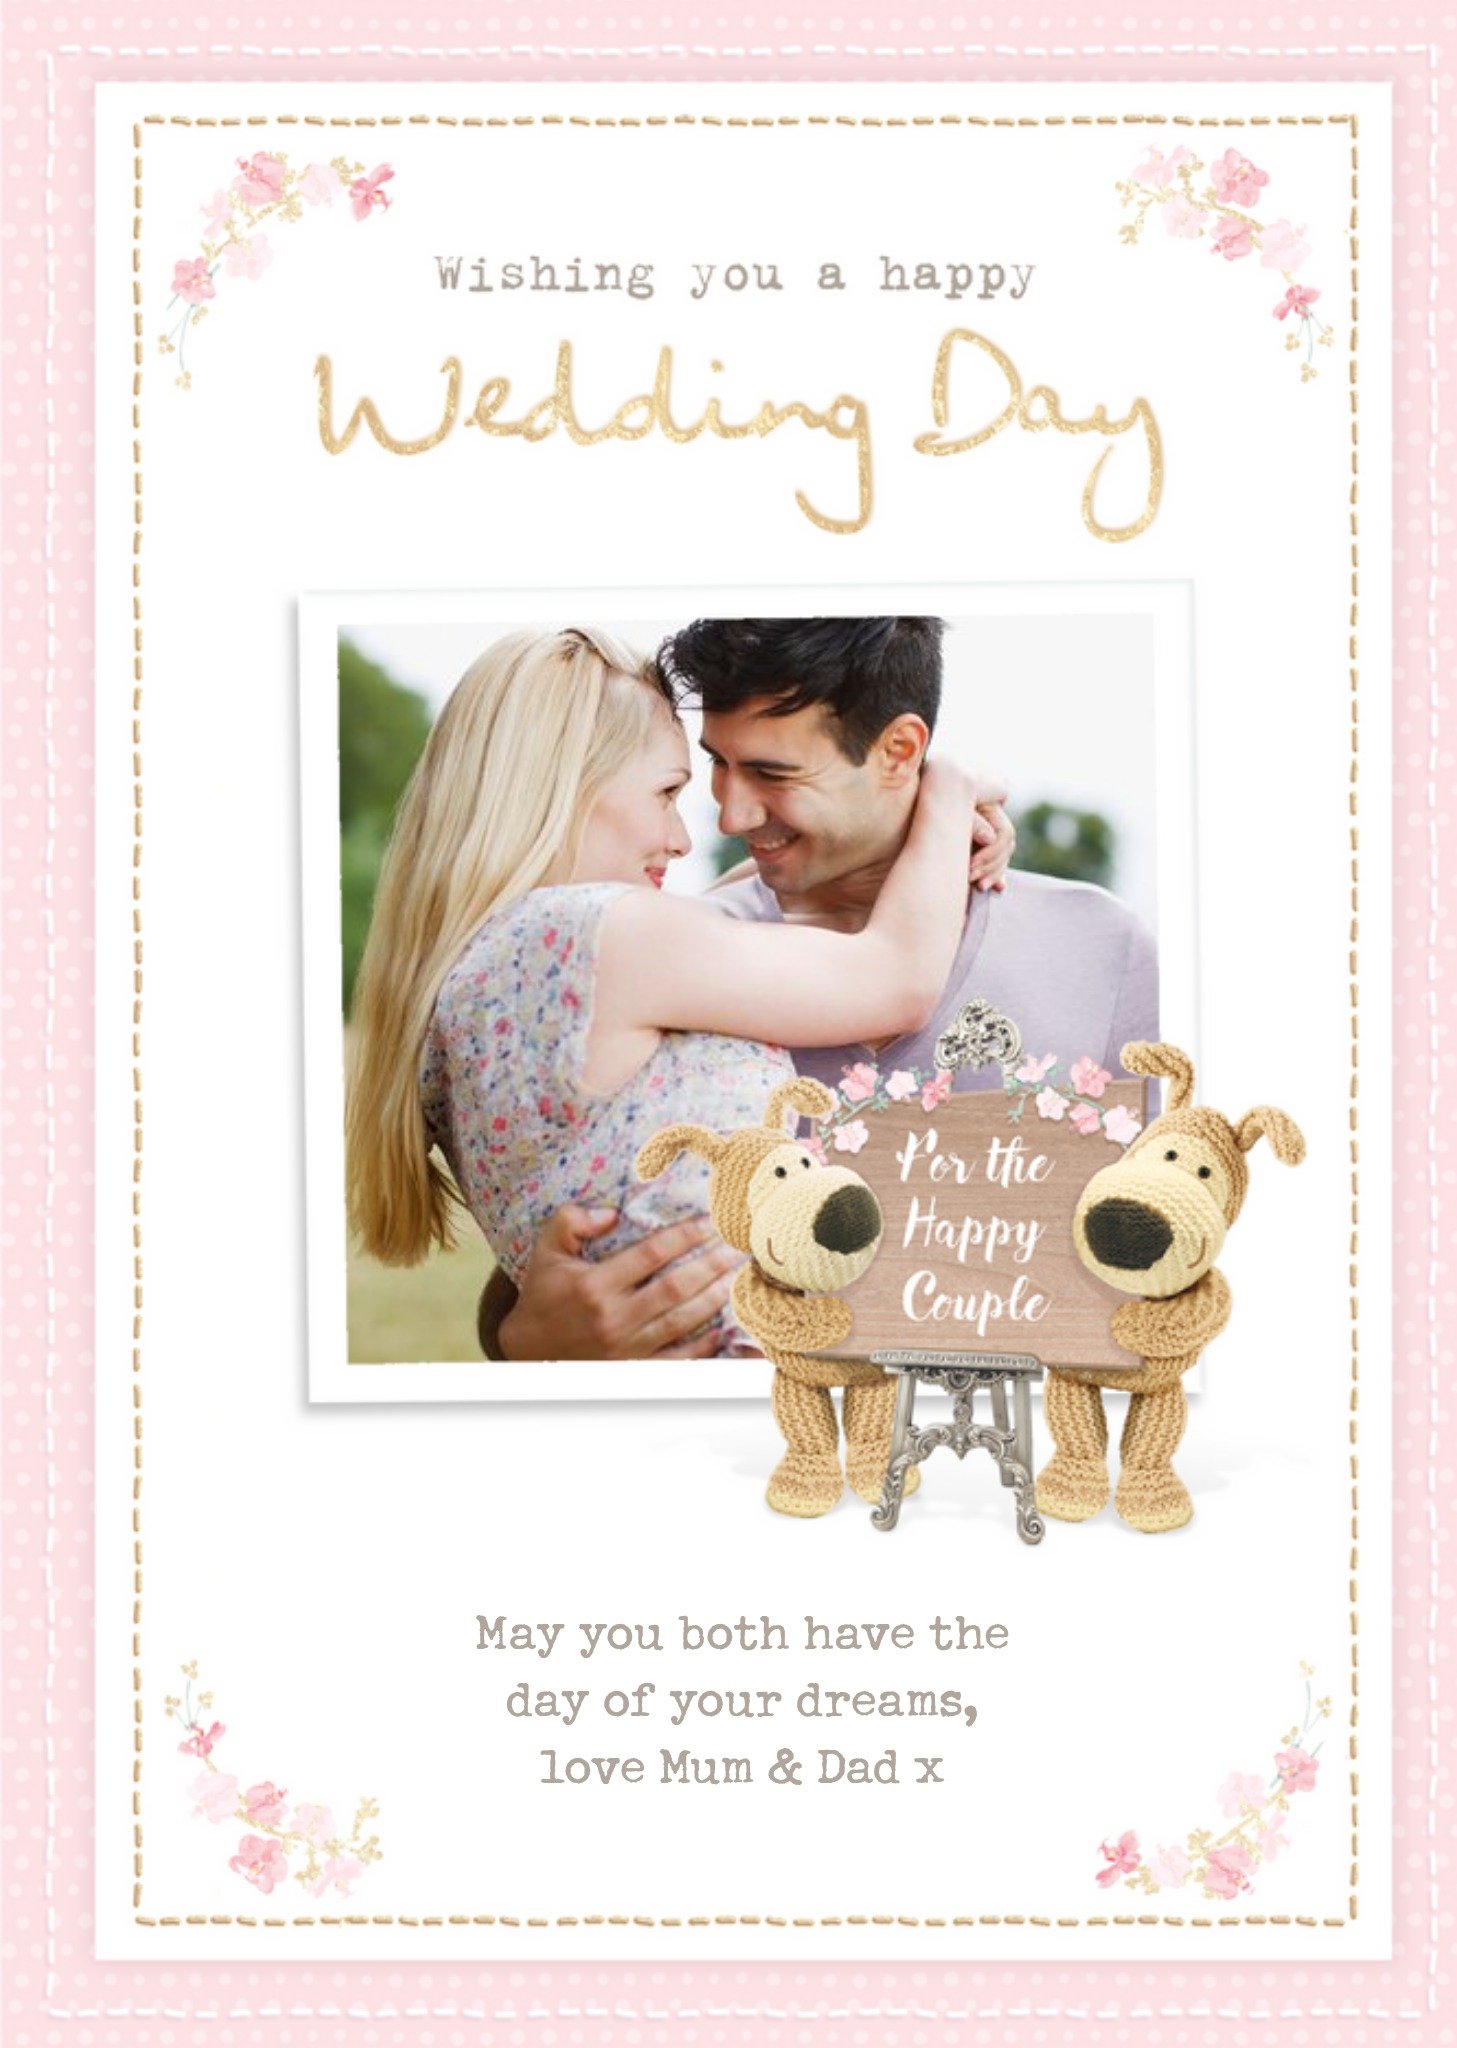 Boofle Sentimental Wedding Day Photo Upload Card From Mum And Dad, Large